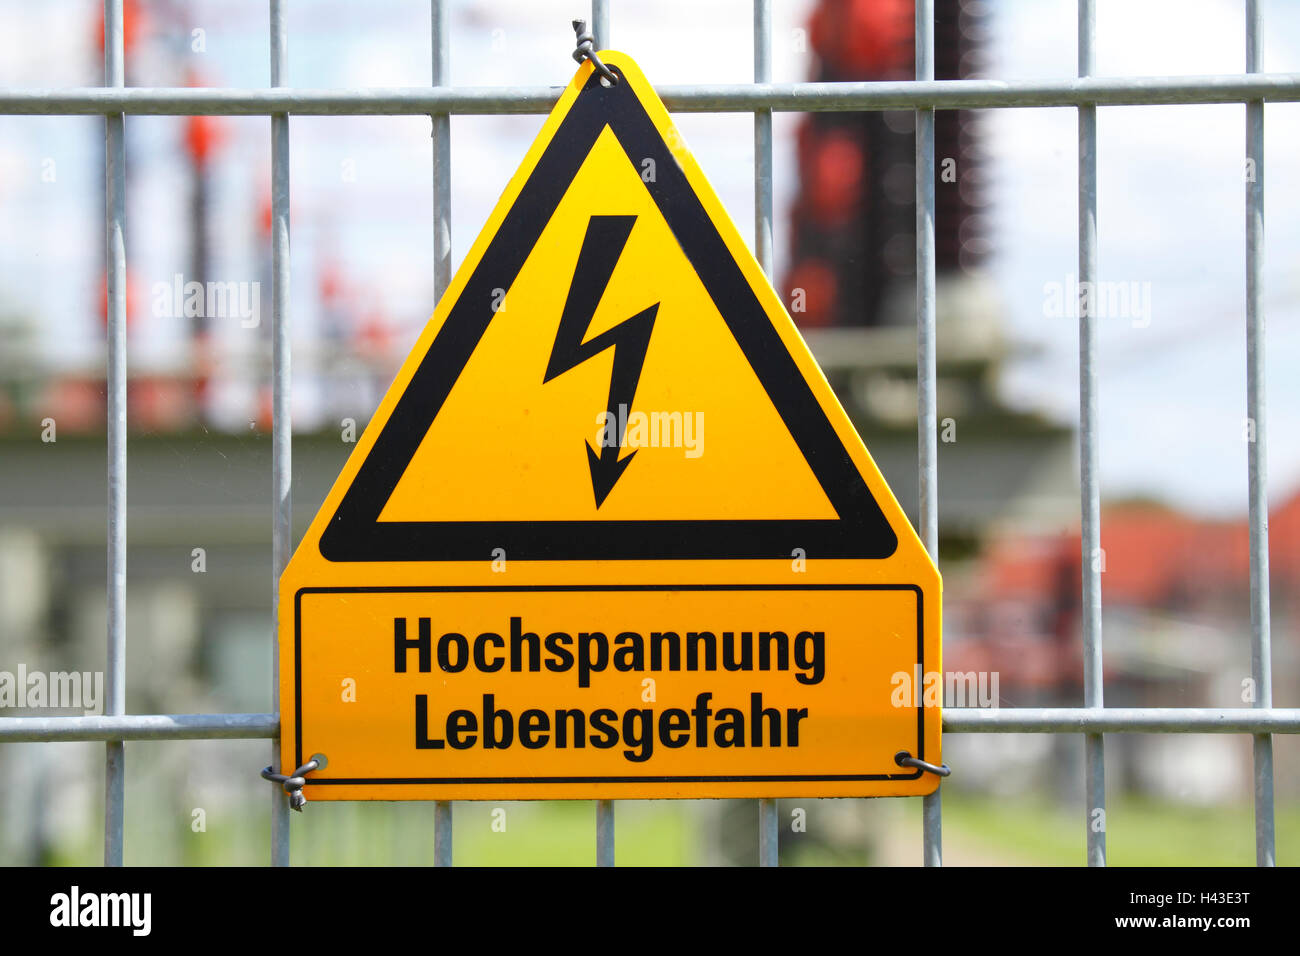 Warning sign, Hochspannung Lebensgefahr, high voltage danger of death in German, on metal fence at an electrical substation Stock Photo